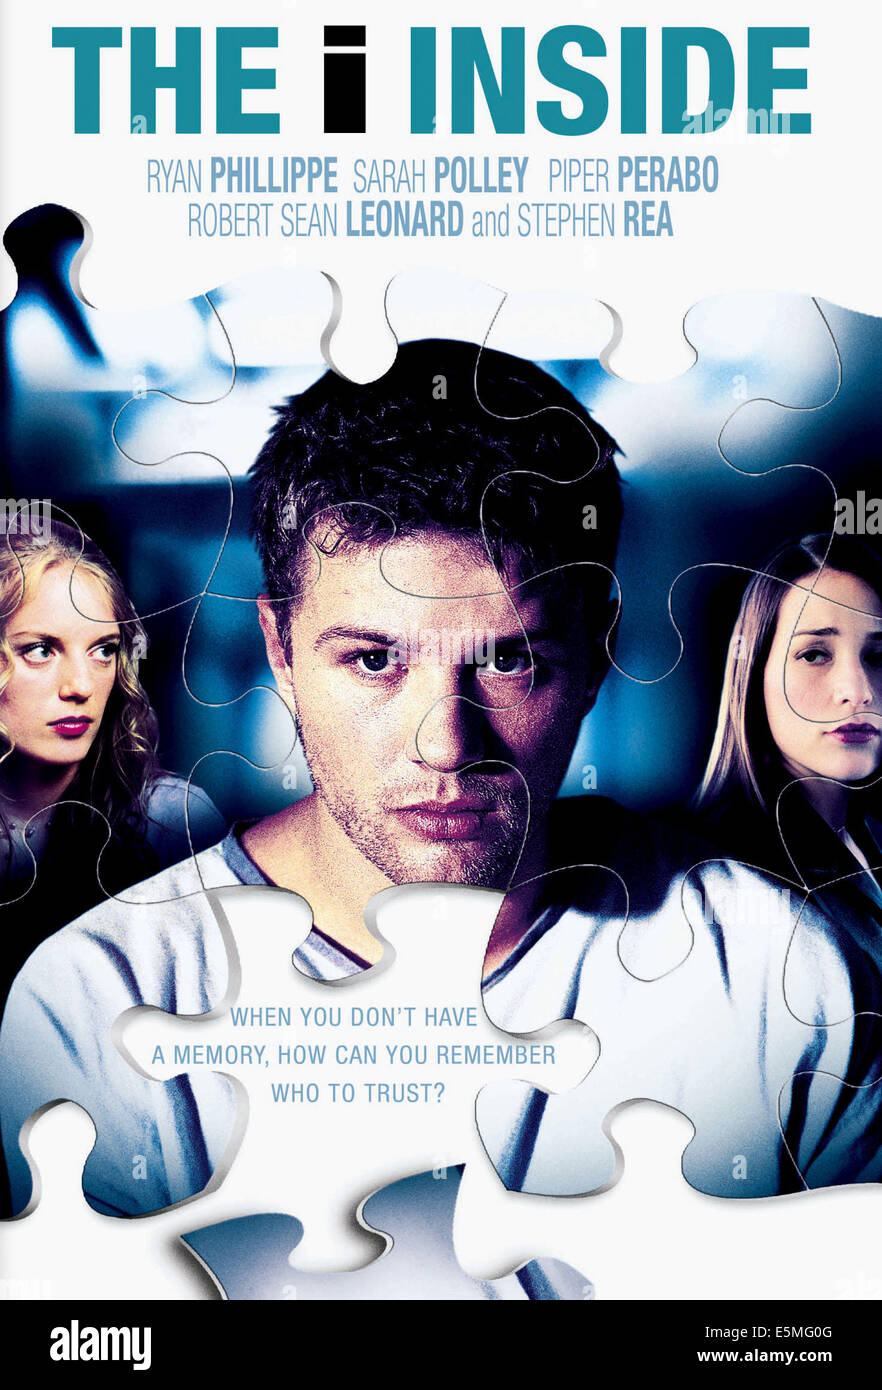 THE I INSIDE, Sarah Polley, Ryan Phillippe, Piper Perabo, 2003, (c) Dimension Films/courtesy Everett Collection Stock Photo